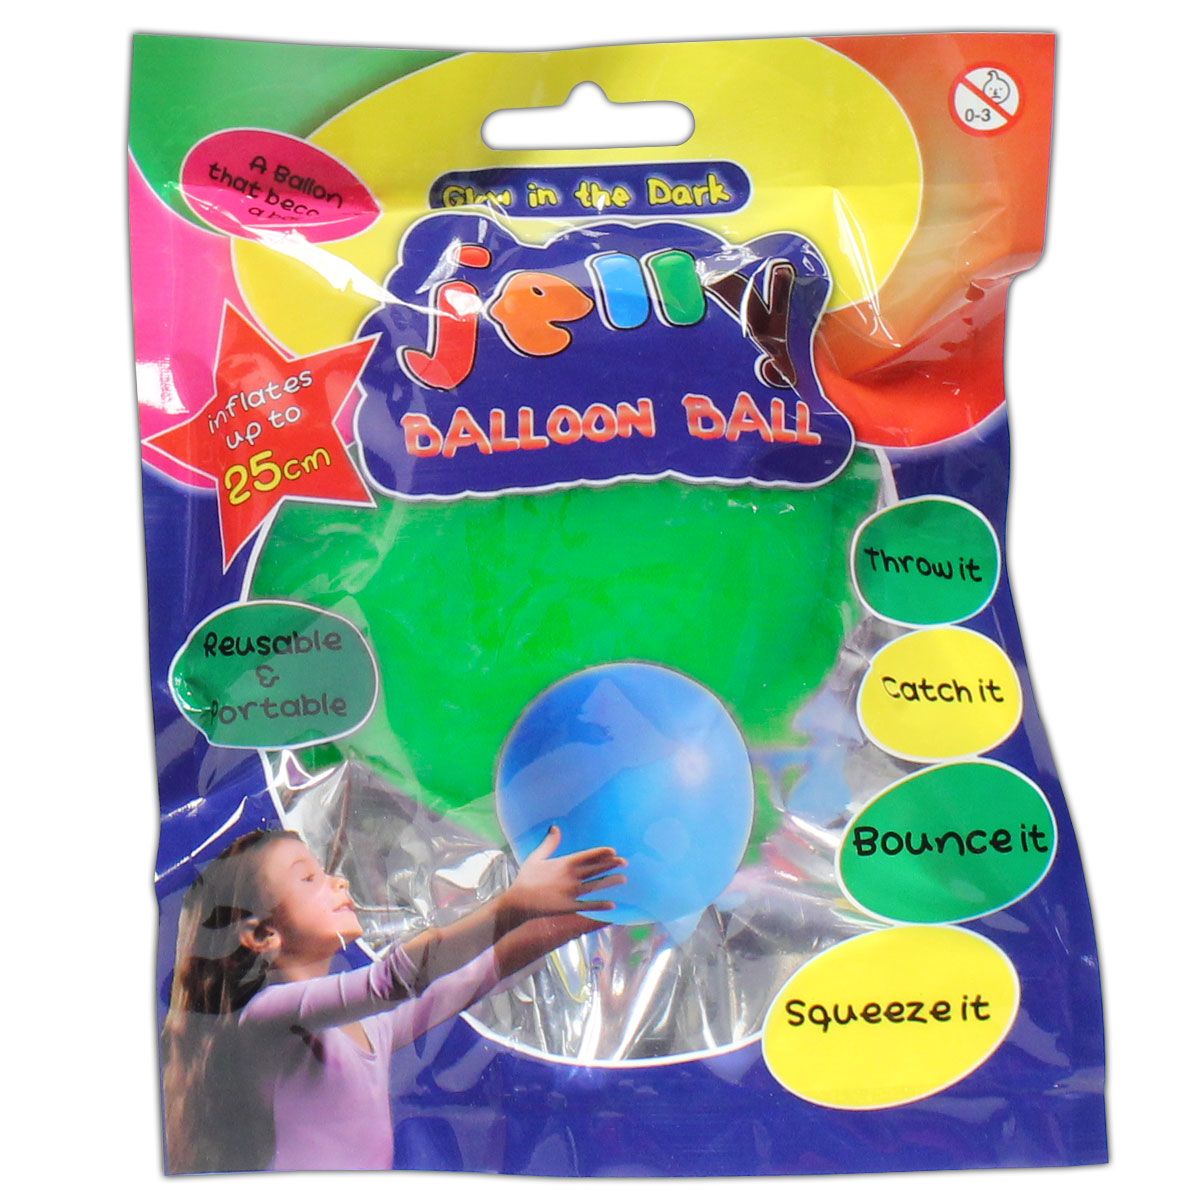 Inflatable Jelly Balloon Ball Throw Catch Squeeze Bounce Balls Gifts Green 